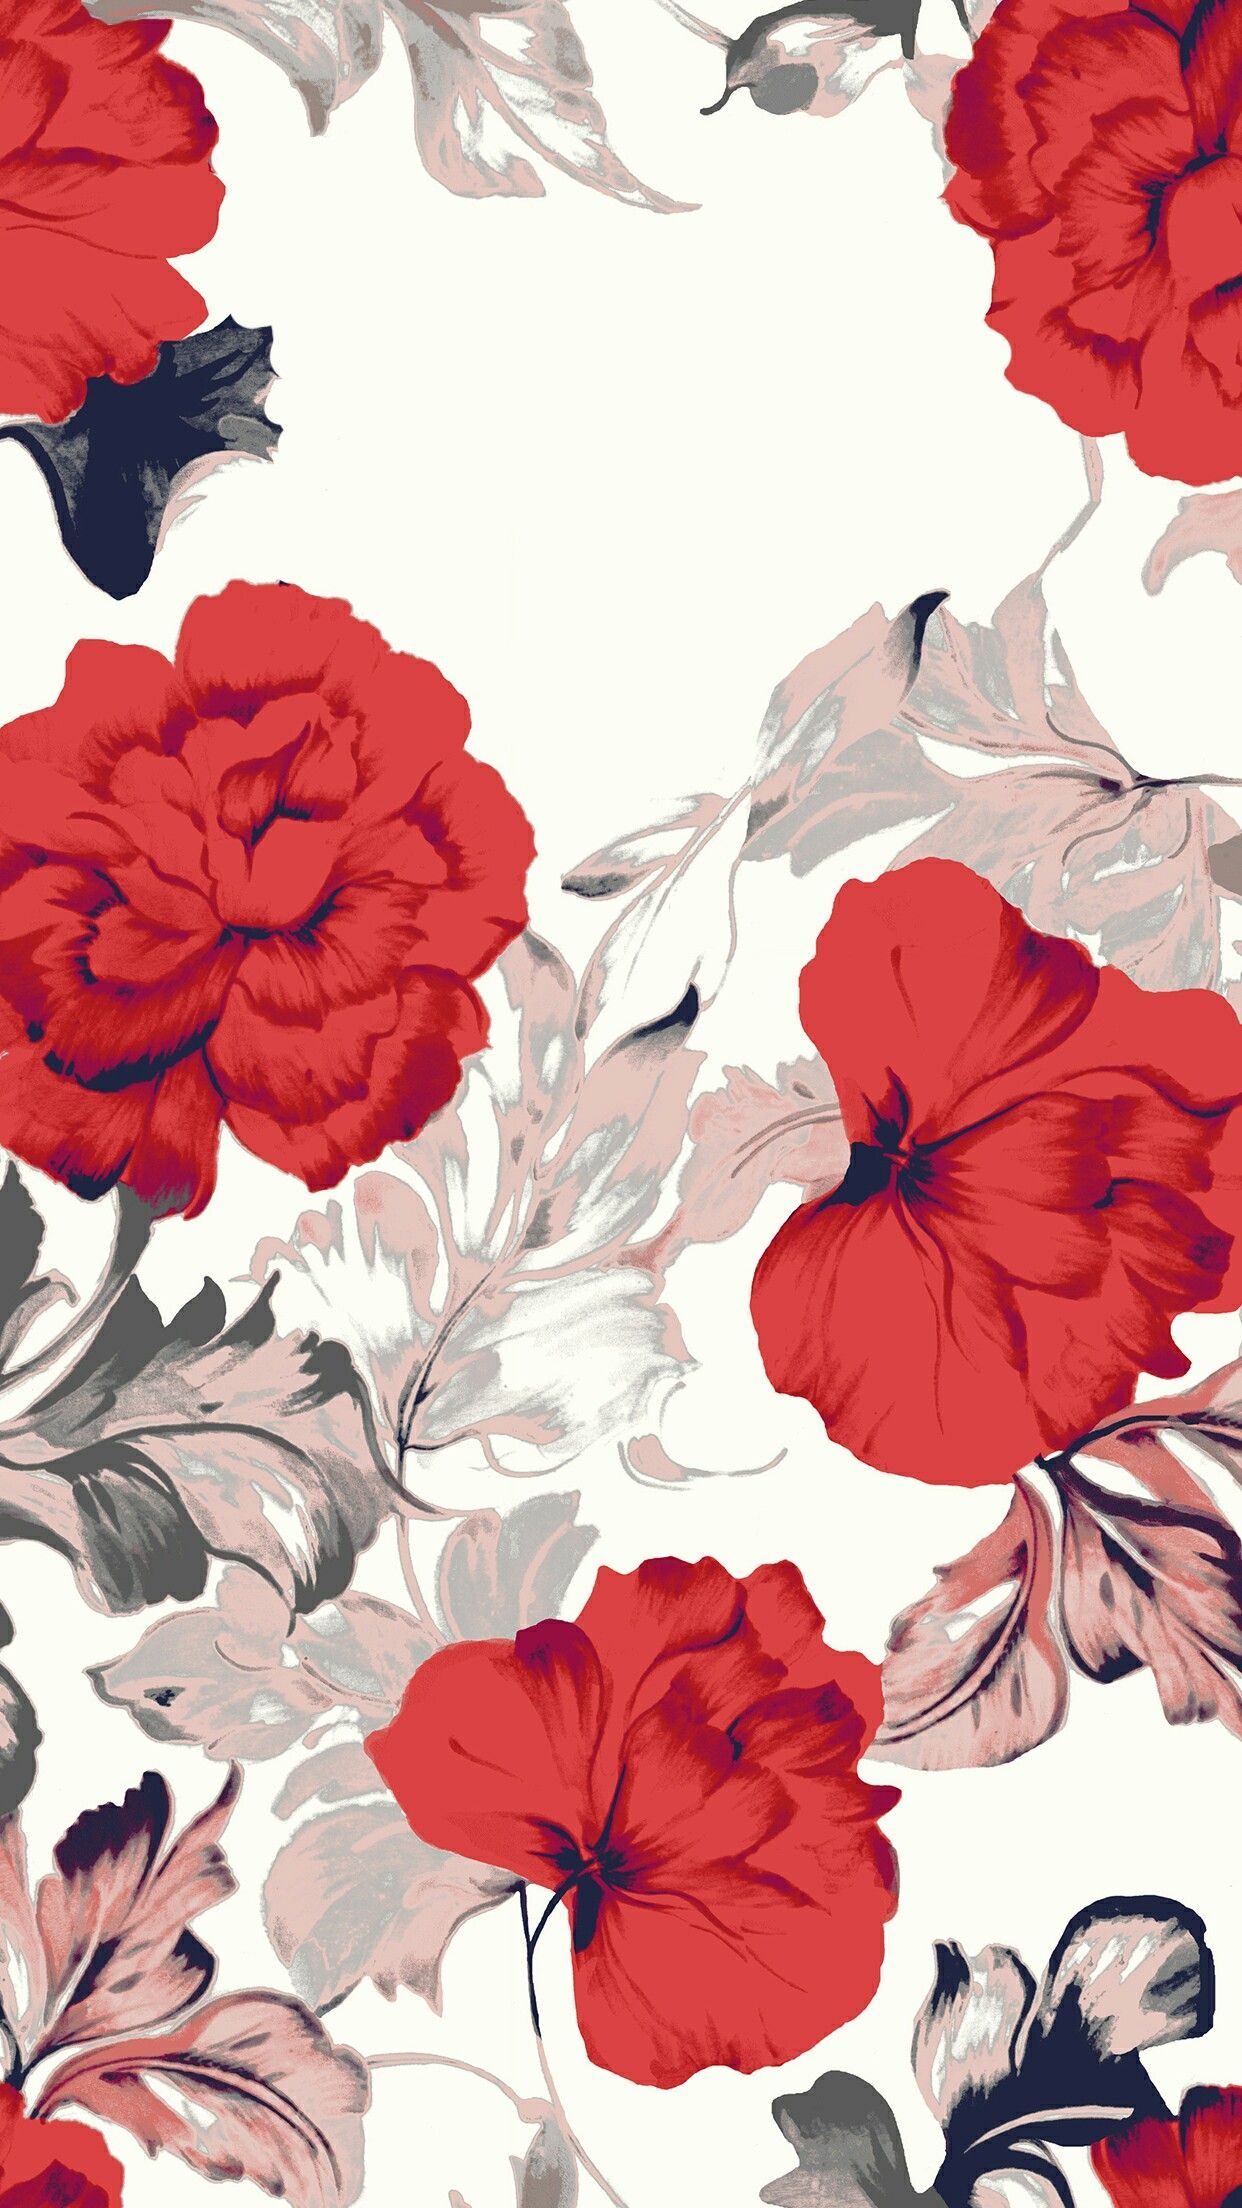 Red Flower Iphone Wallpapers